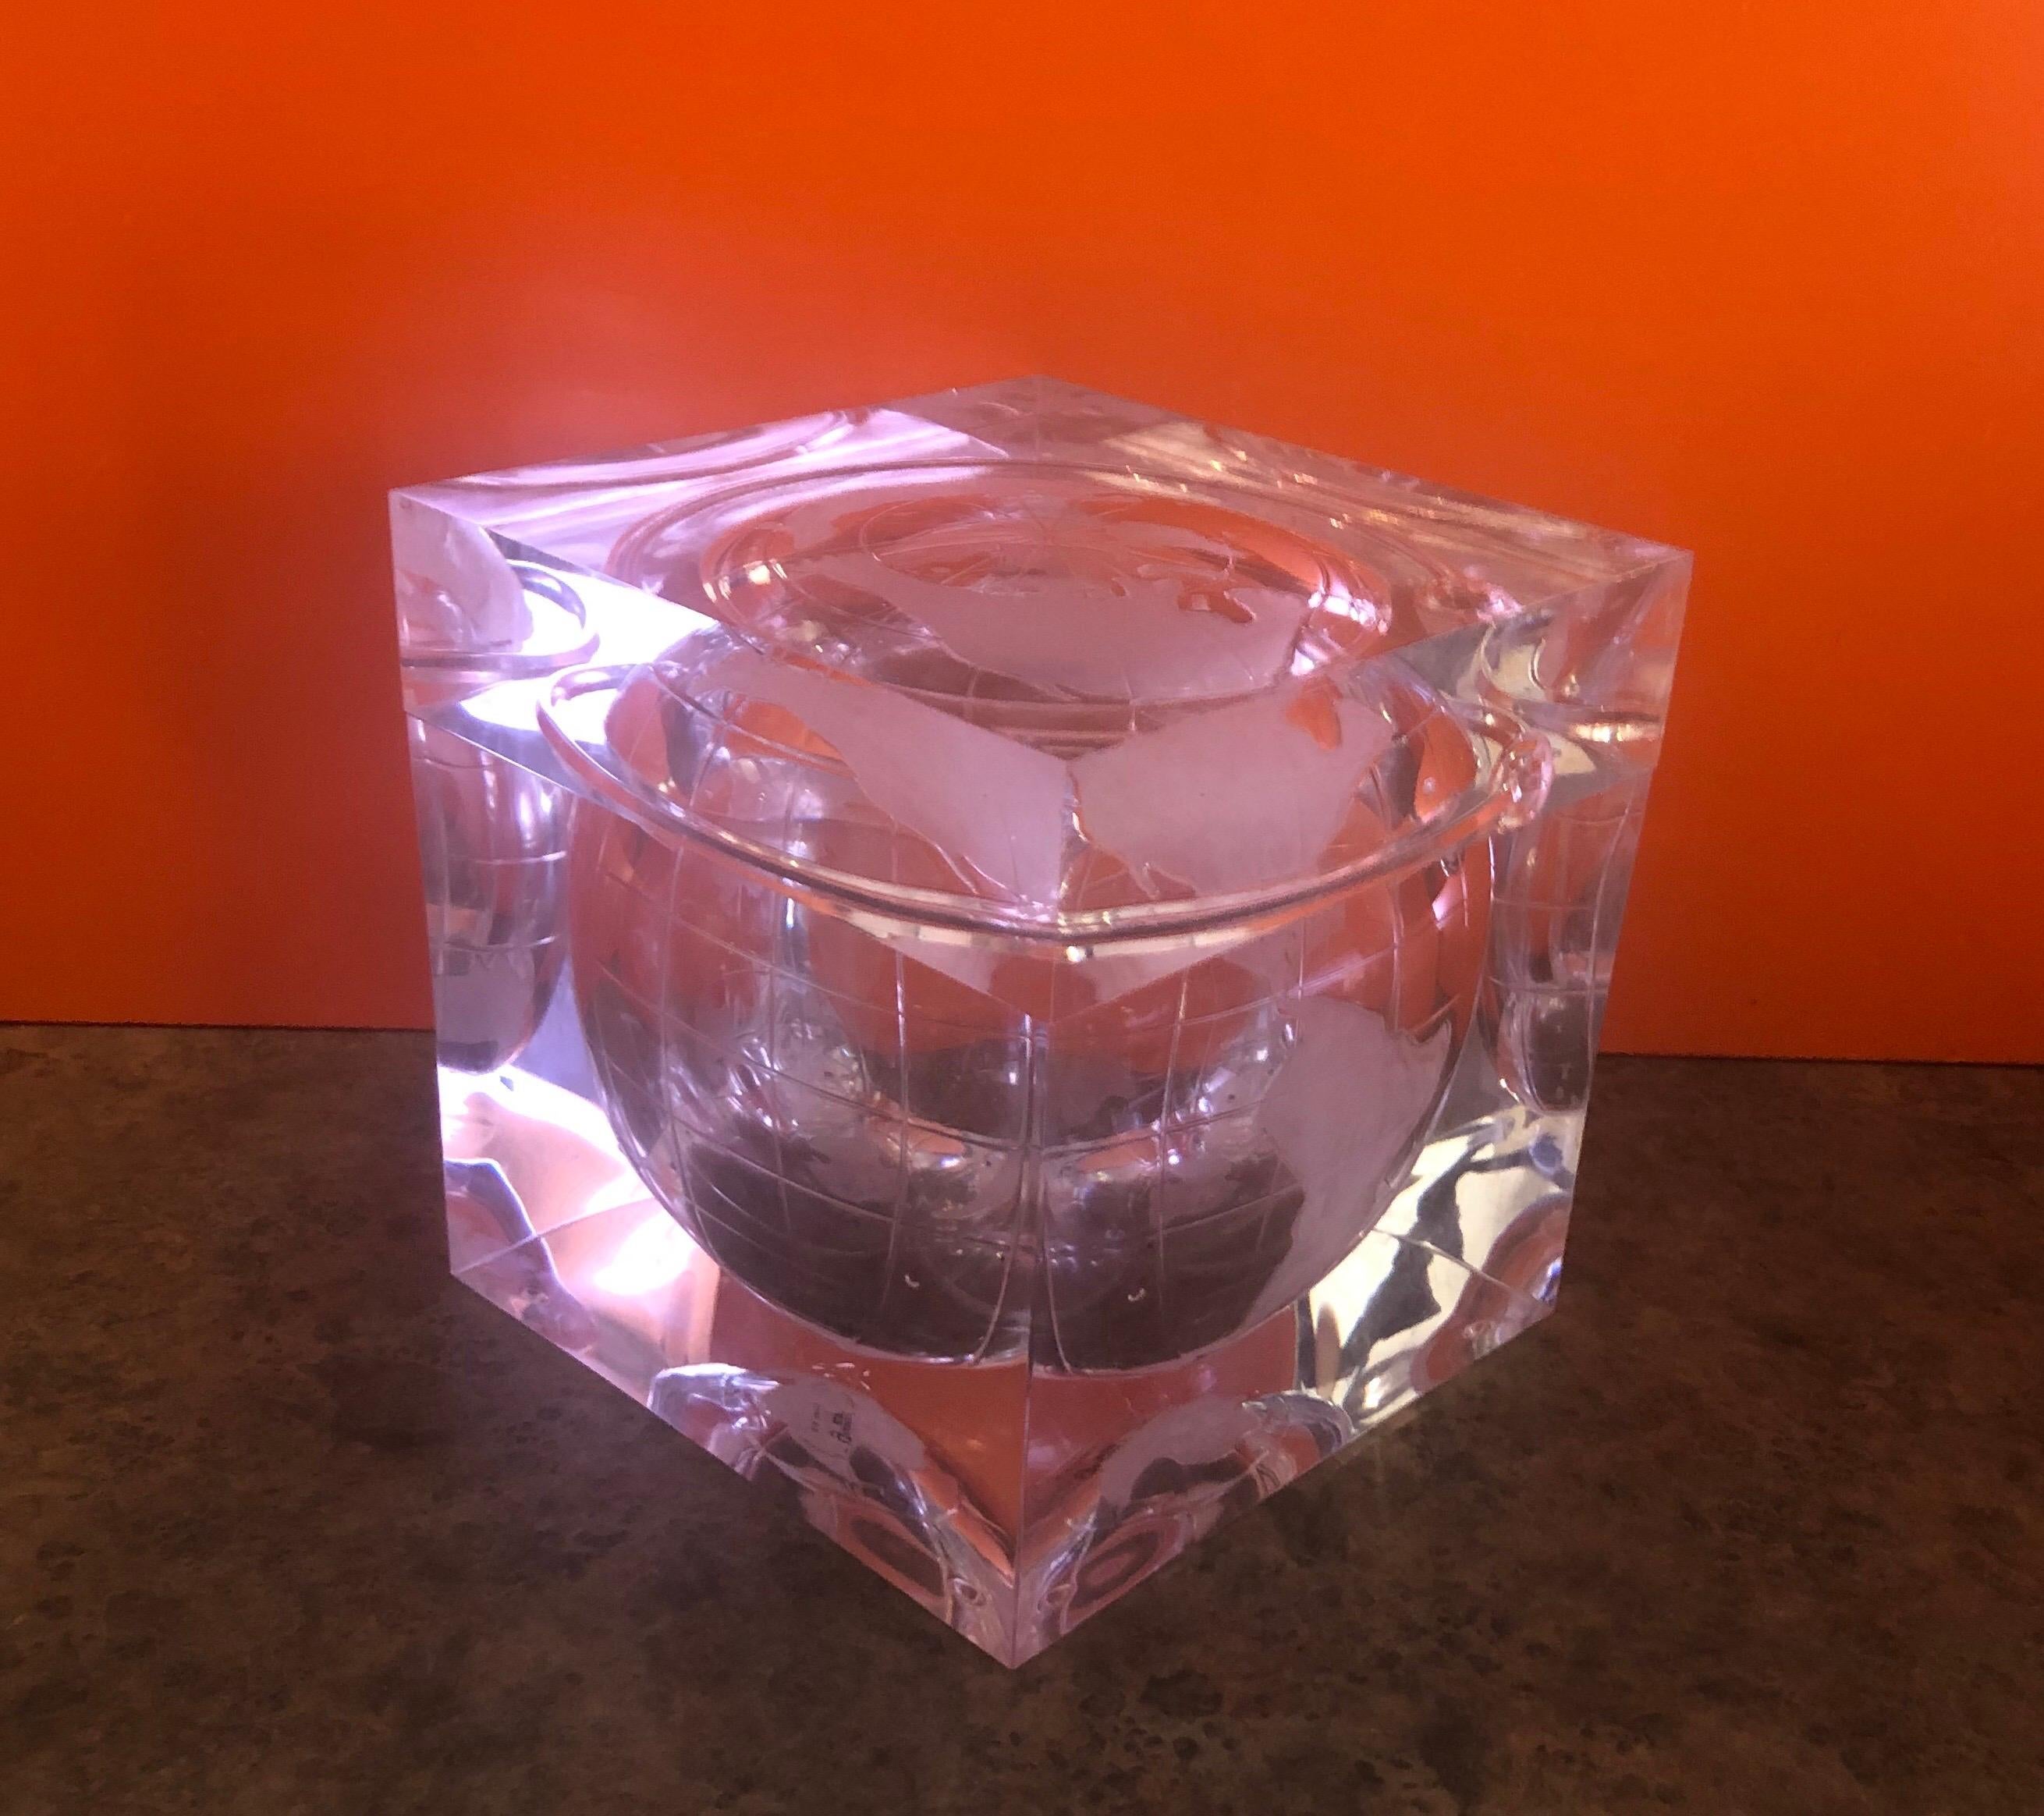 Etched Lucite world / globe ice bucket by Alessandro Albrizzi, circa 1980s. Designed as a clear Lucite cube with an etched circular depiction of the earth on the inside of the bucket with a removable top. The ice bucket its in great condition no